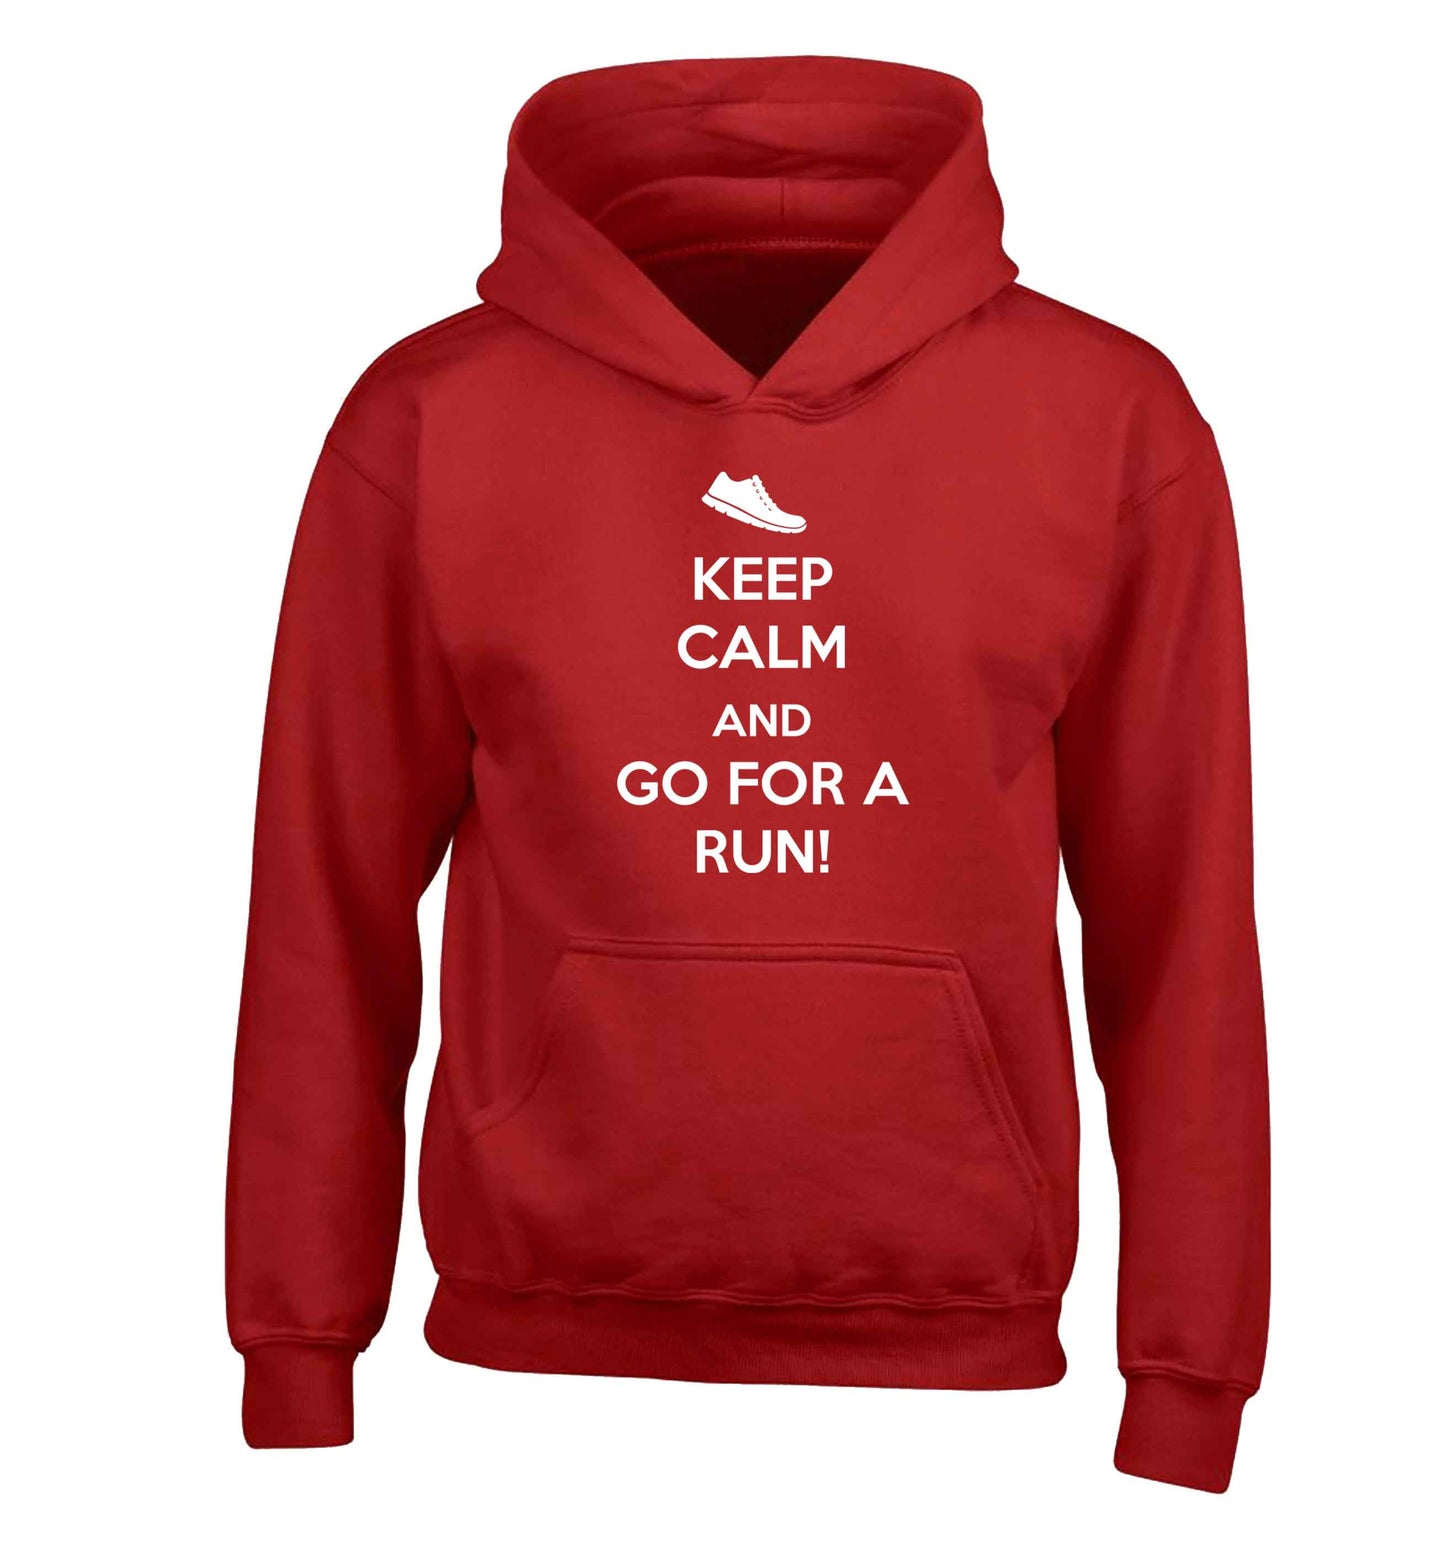 Keep calm and go for a run children's red hoodie 12-13 Years